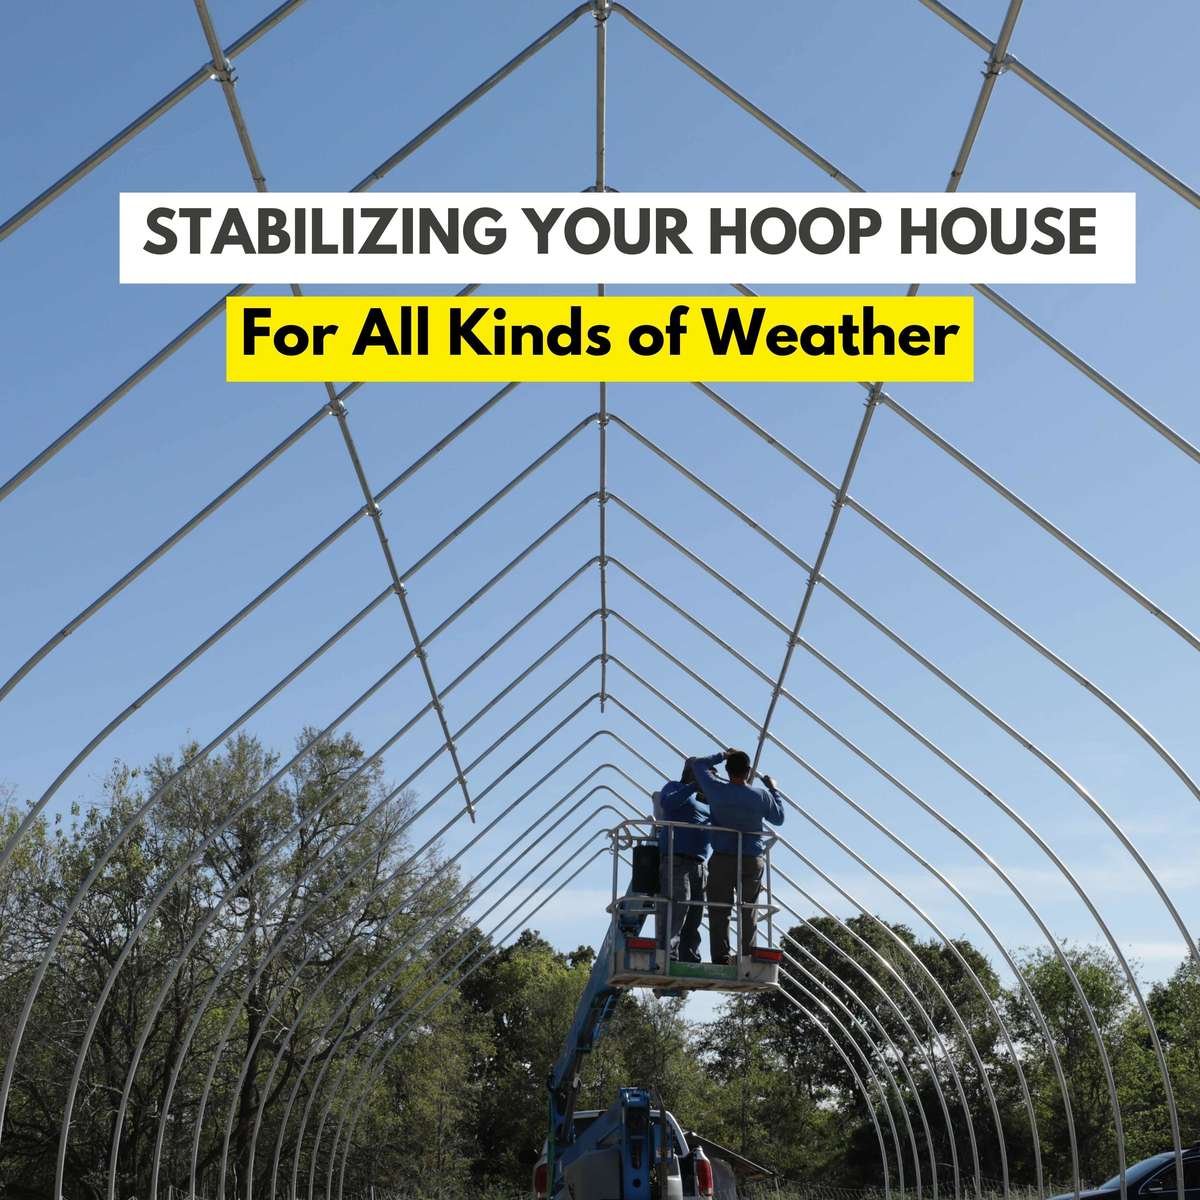 Stabilizing Your Hoop House